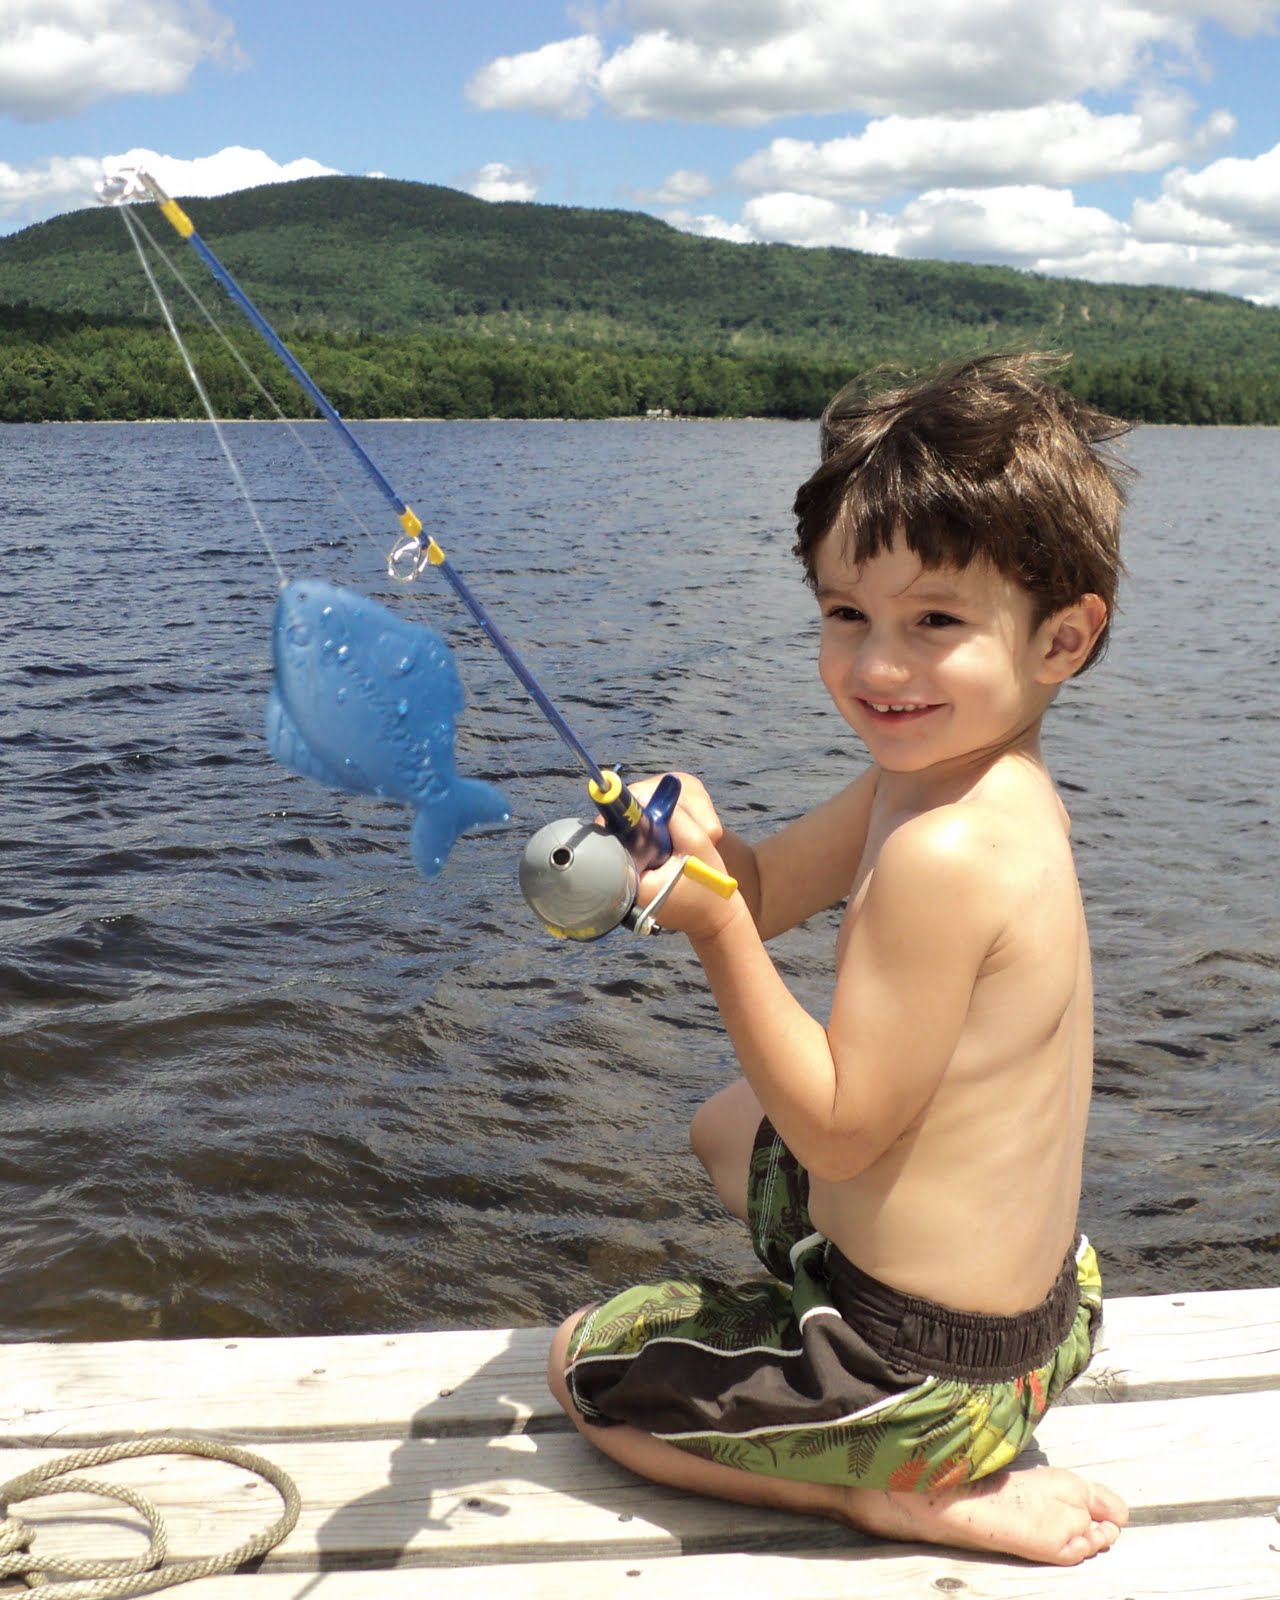 The Maine Outdoorsman: Hook Kids Into Fishing - Putting it All